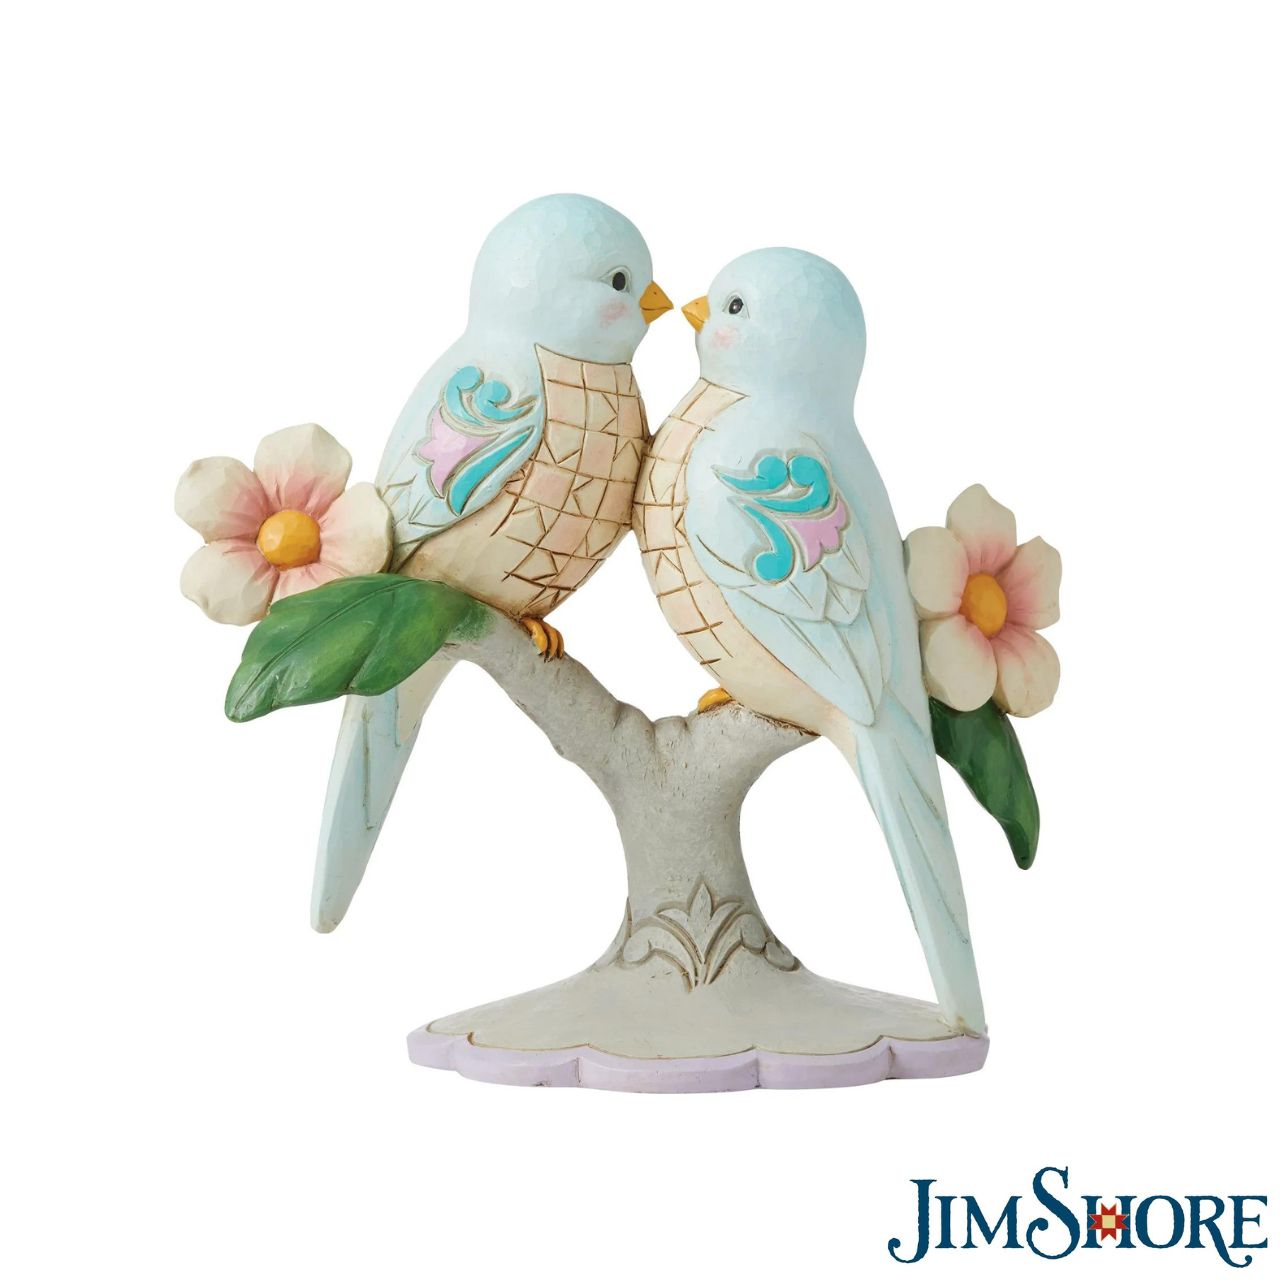 Jim Shore Lovebirds Figurine  "Perfect Harmony" Beak to beak, these two bluebirds stare into each other's eyes with understanding and appreciation. Honouring both love and friendship, the pair share a branch of pink flowers and beautifully patterned matching plumage in this Jim Shore gift.